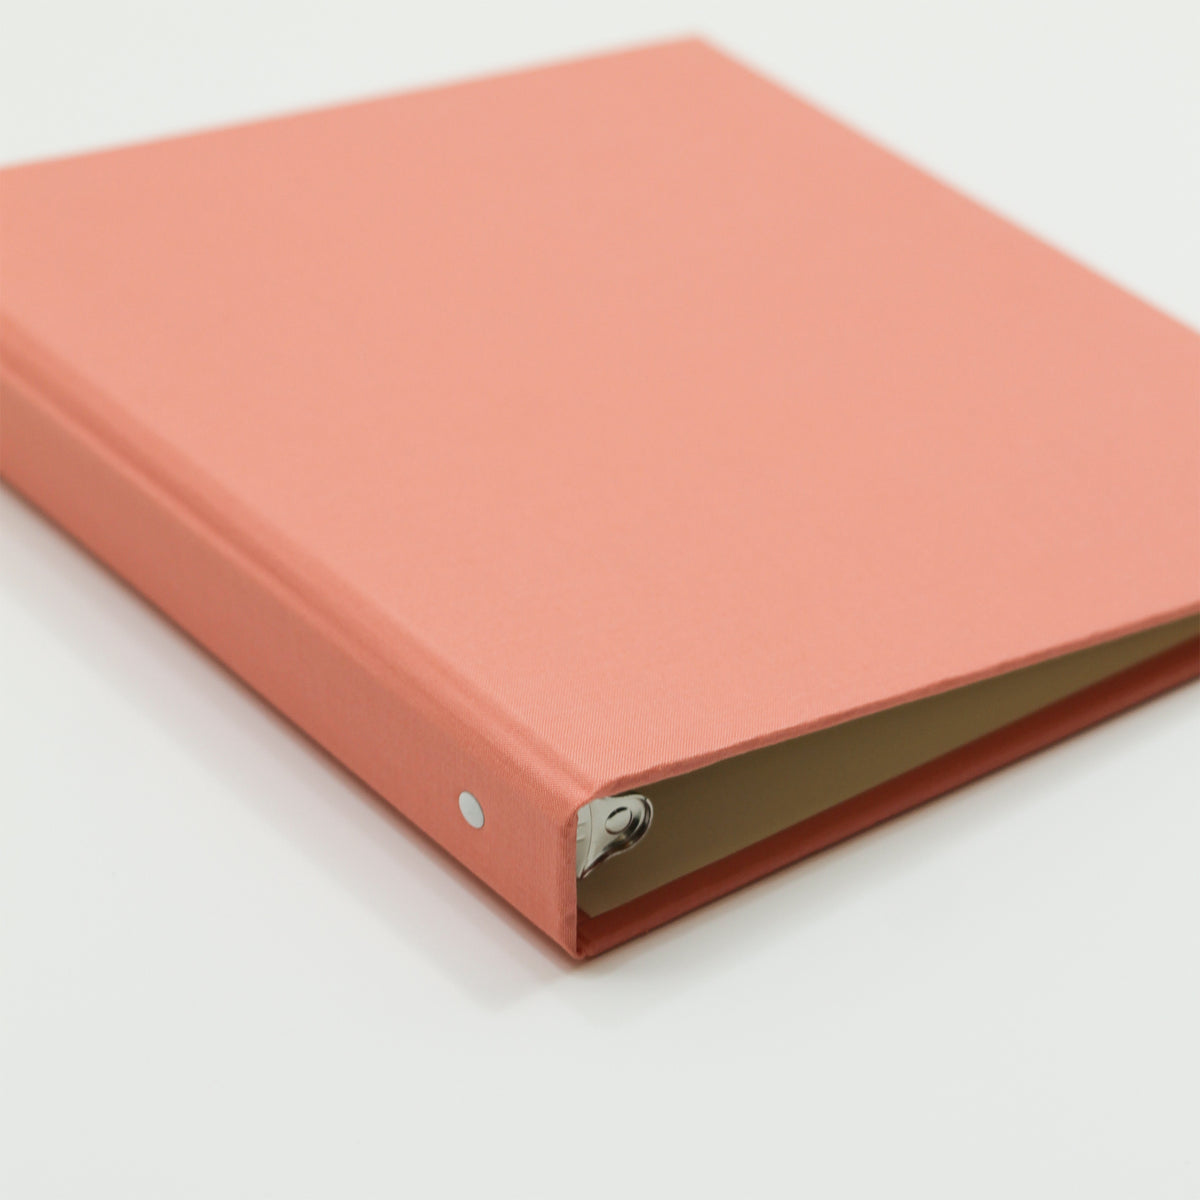 Photo Binder (for 5x7 photos) with Coral Cotton Cover